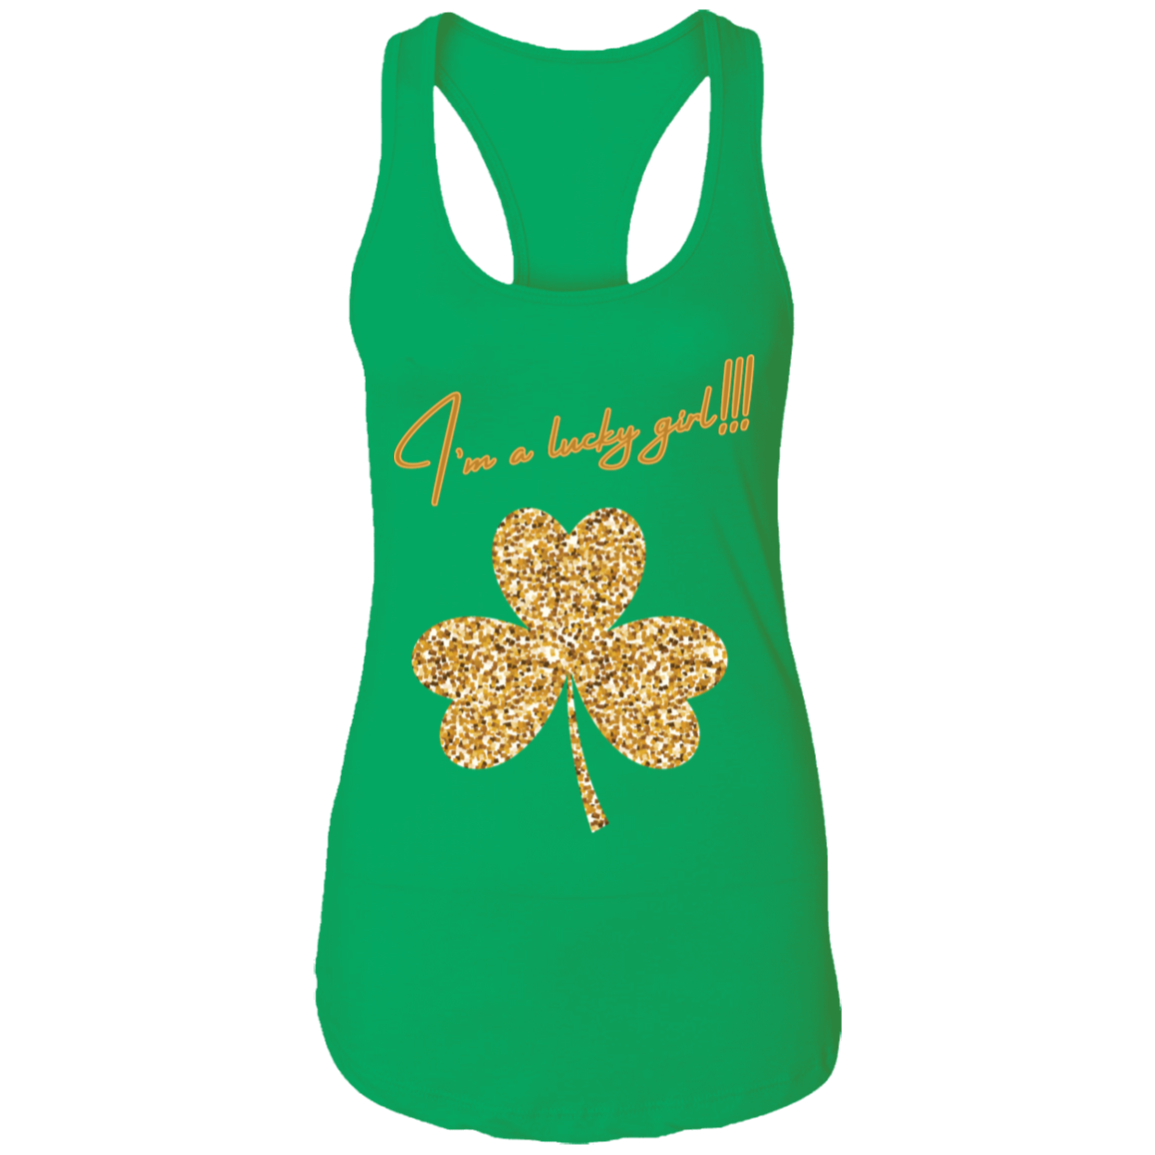 I’m a lucky girl Ladies Ideal Racerback Tank